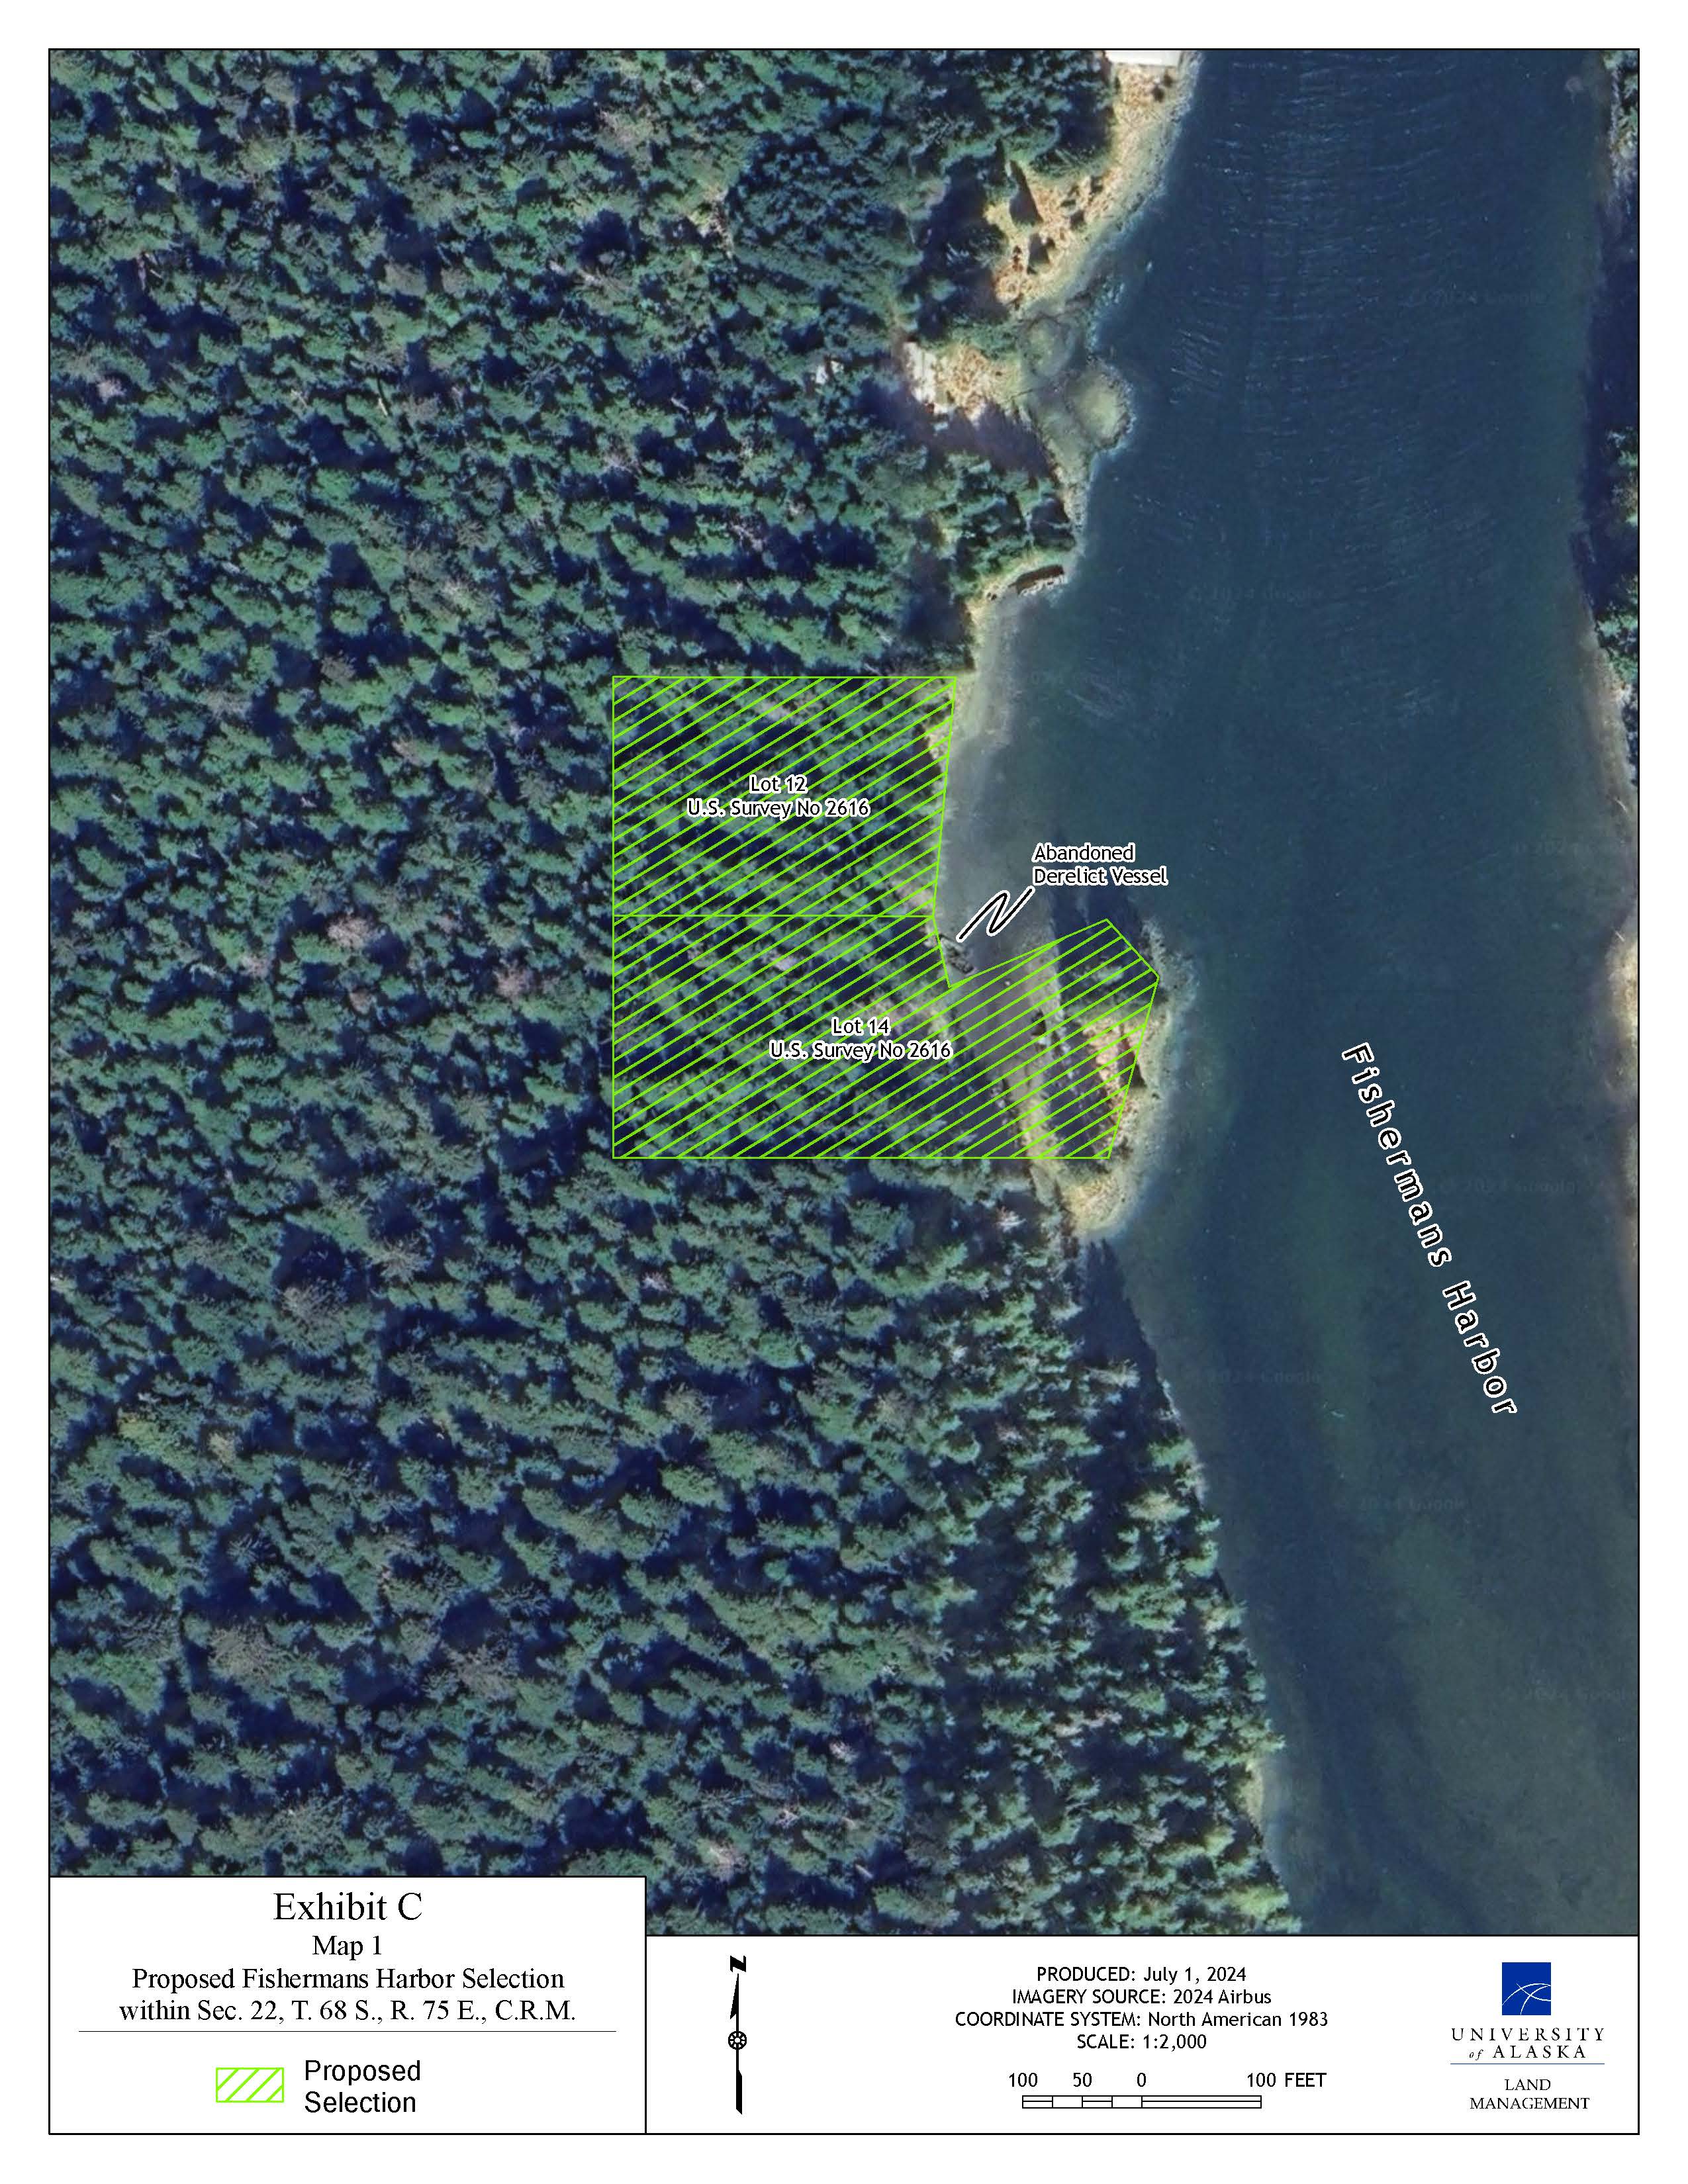 Map depicting the proposed selection of 3.13 acres of the lands on Kosciusko Island.